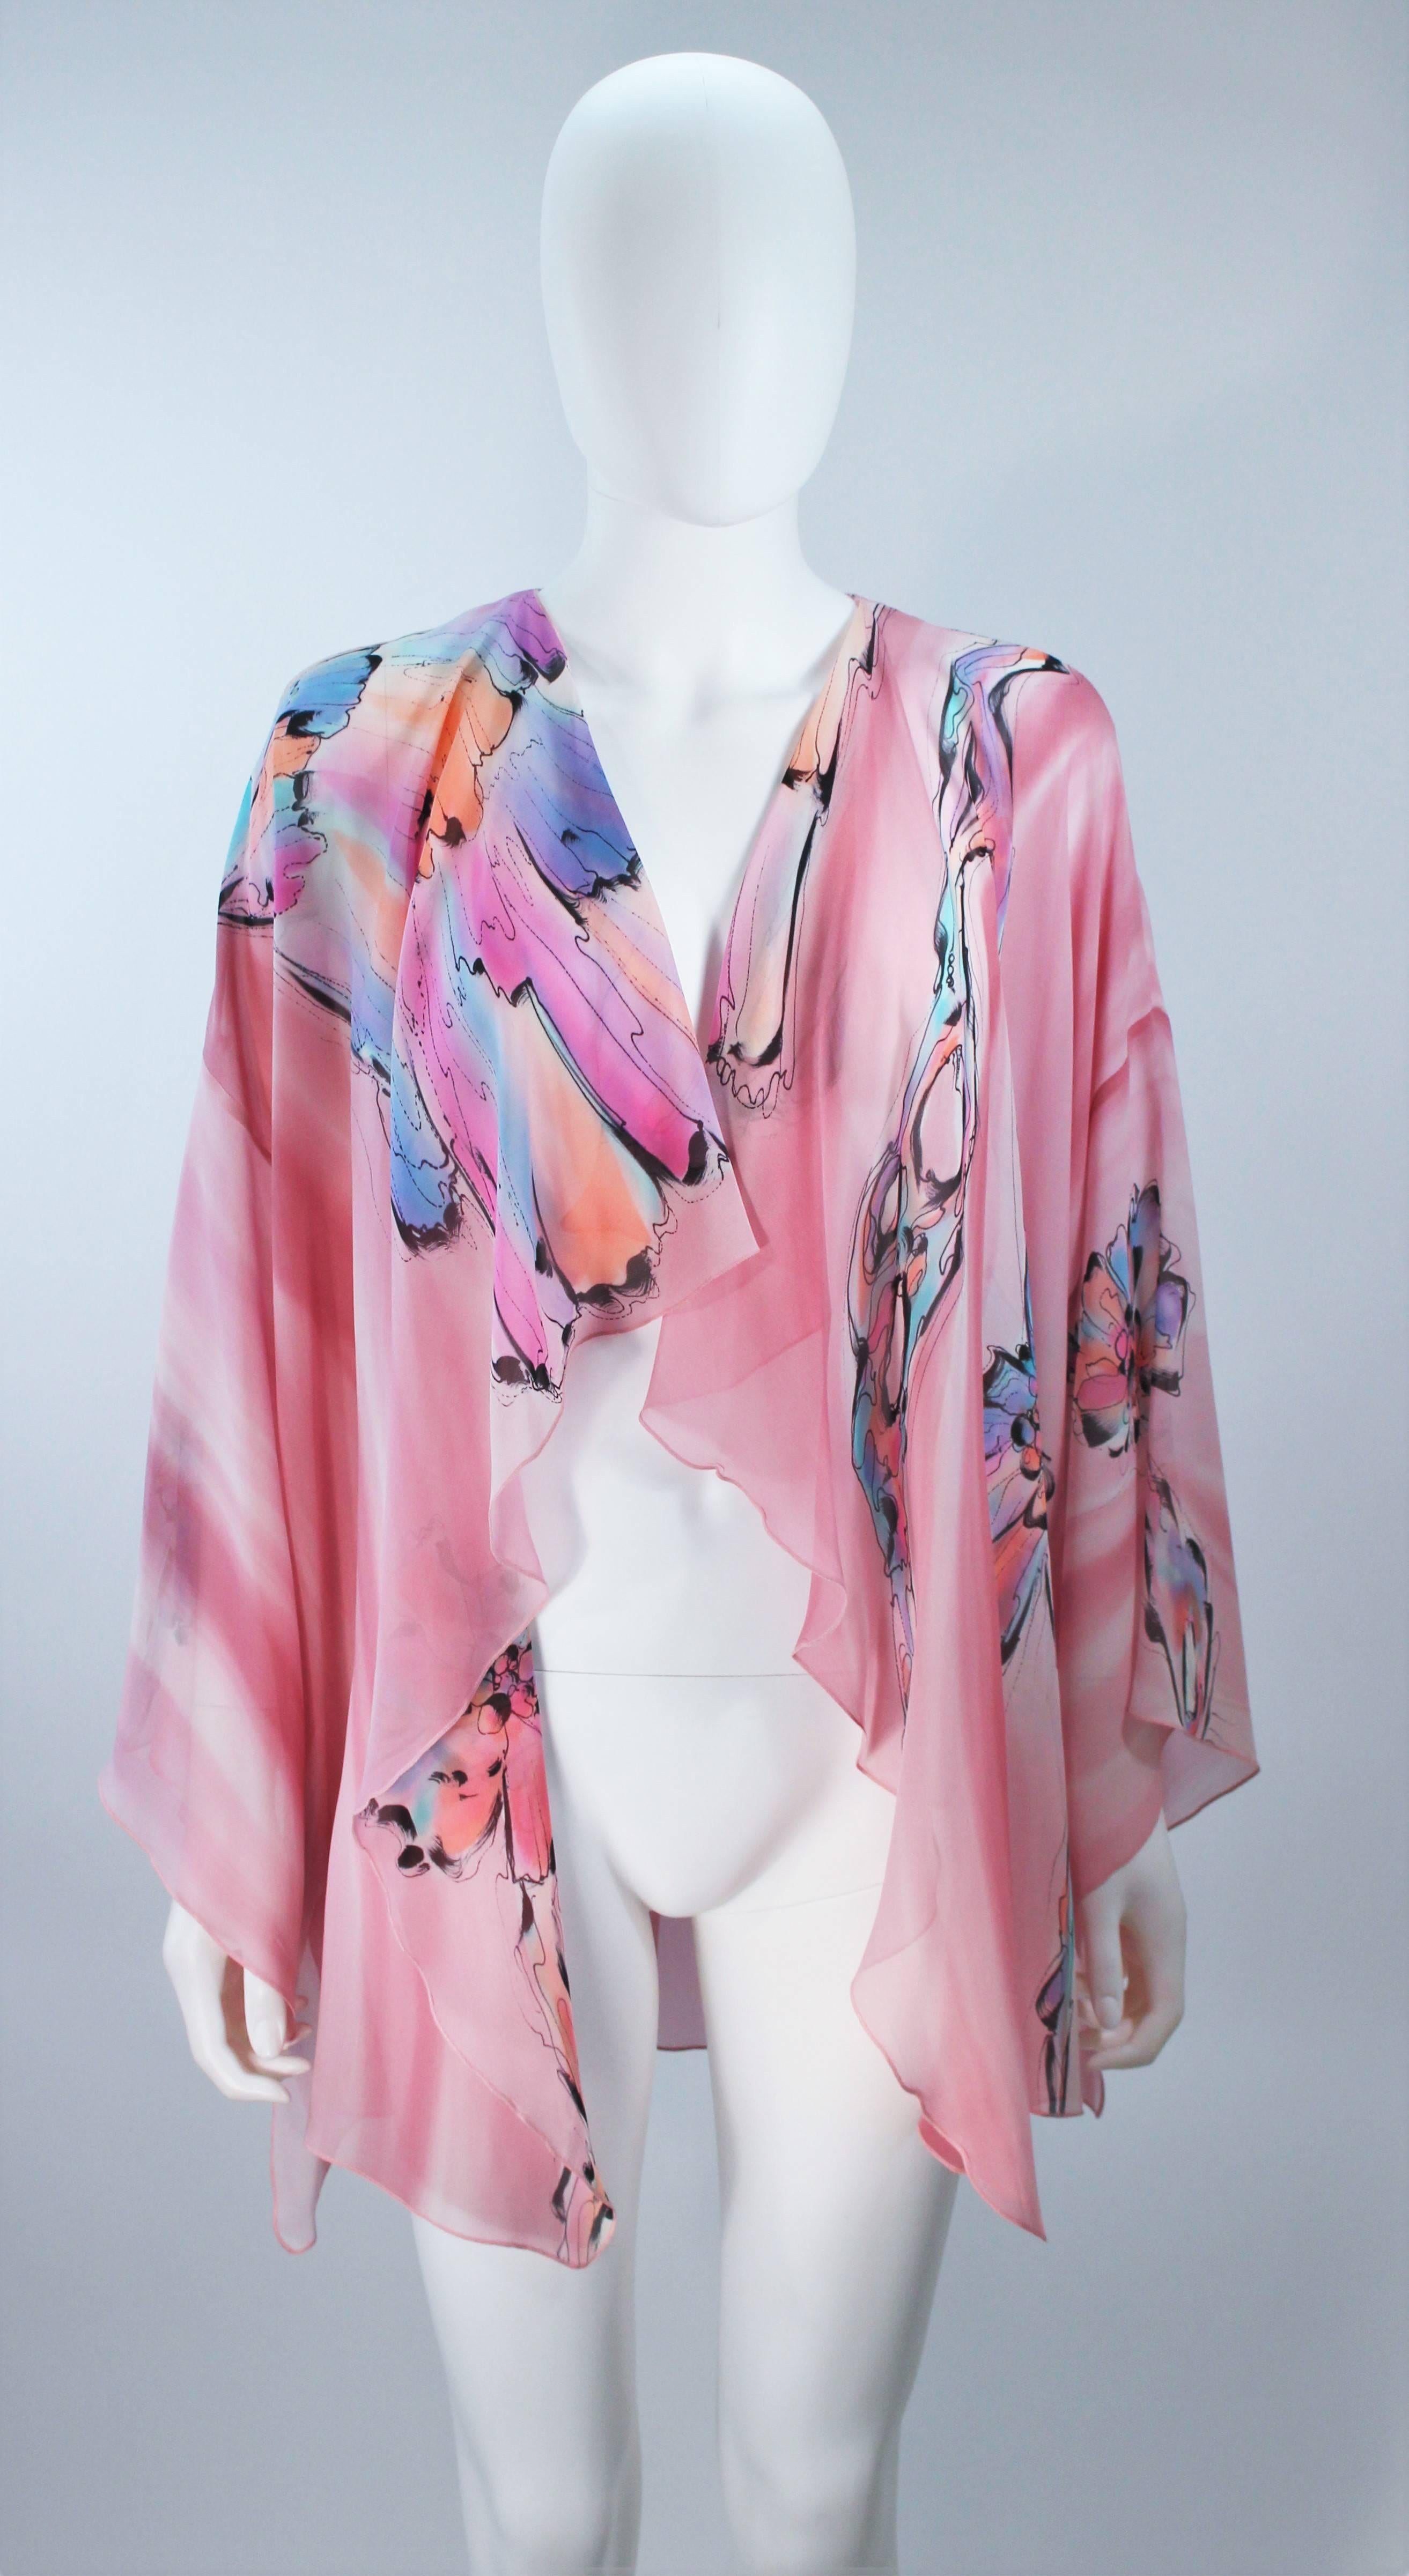 Yolanda Lorente jacket
Pink opaque silk with hand-painted design 
Elegant draping 
Dry clean only


